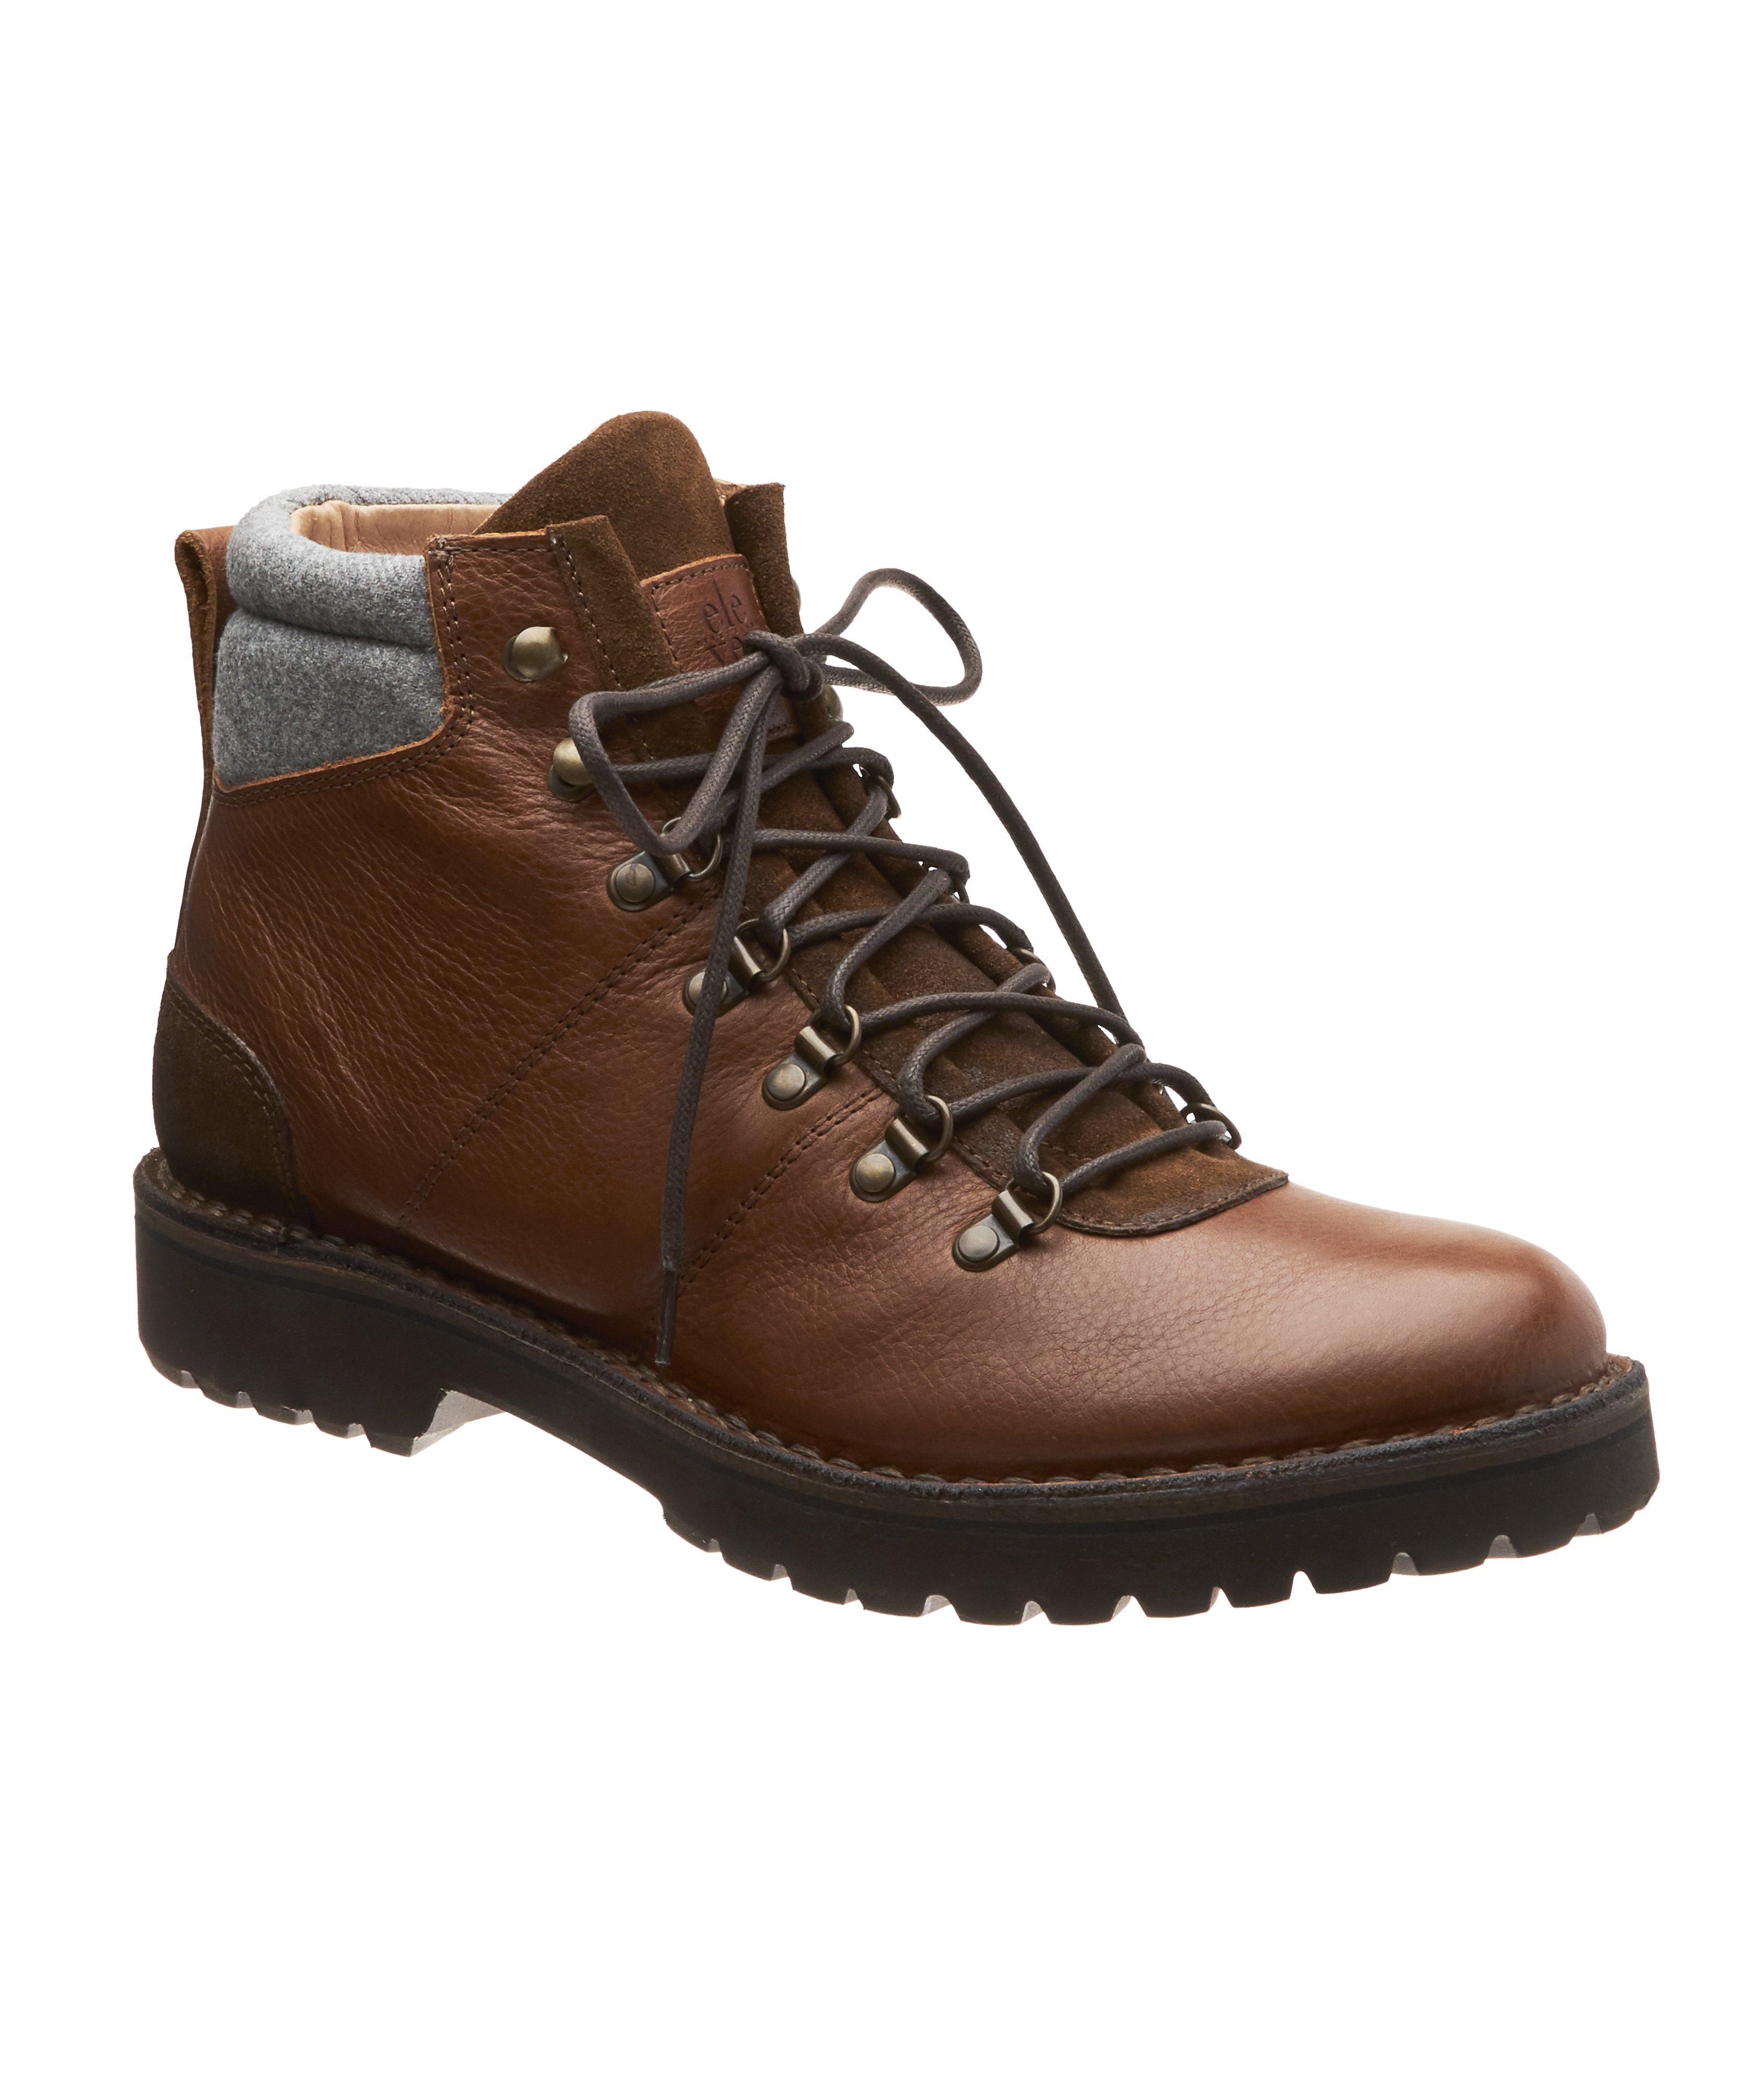 Leather Hiking Boots image 0